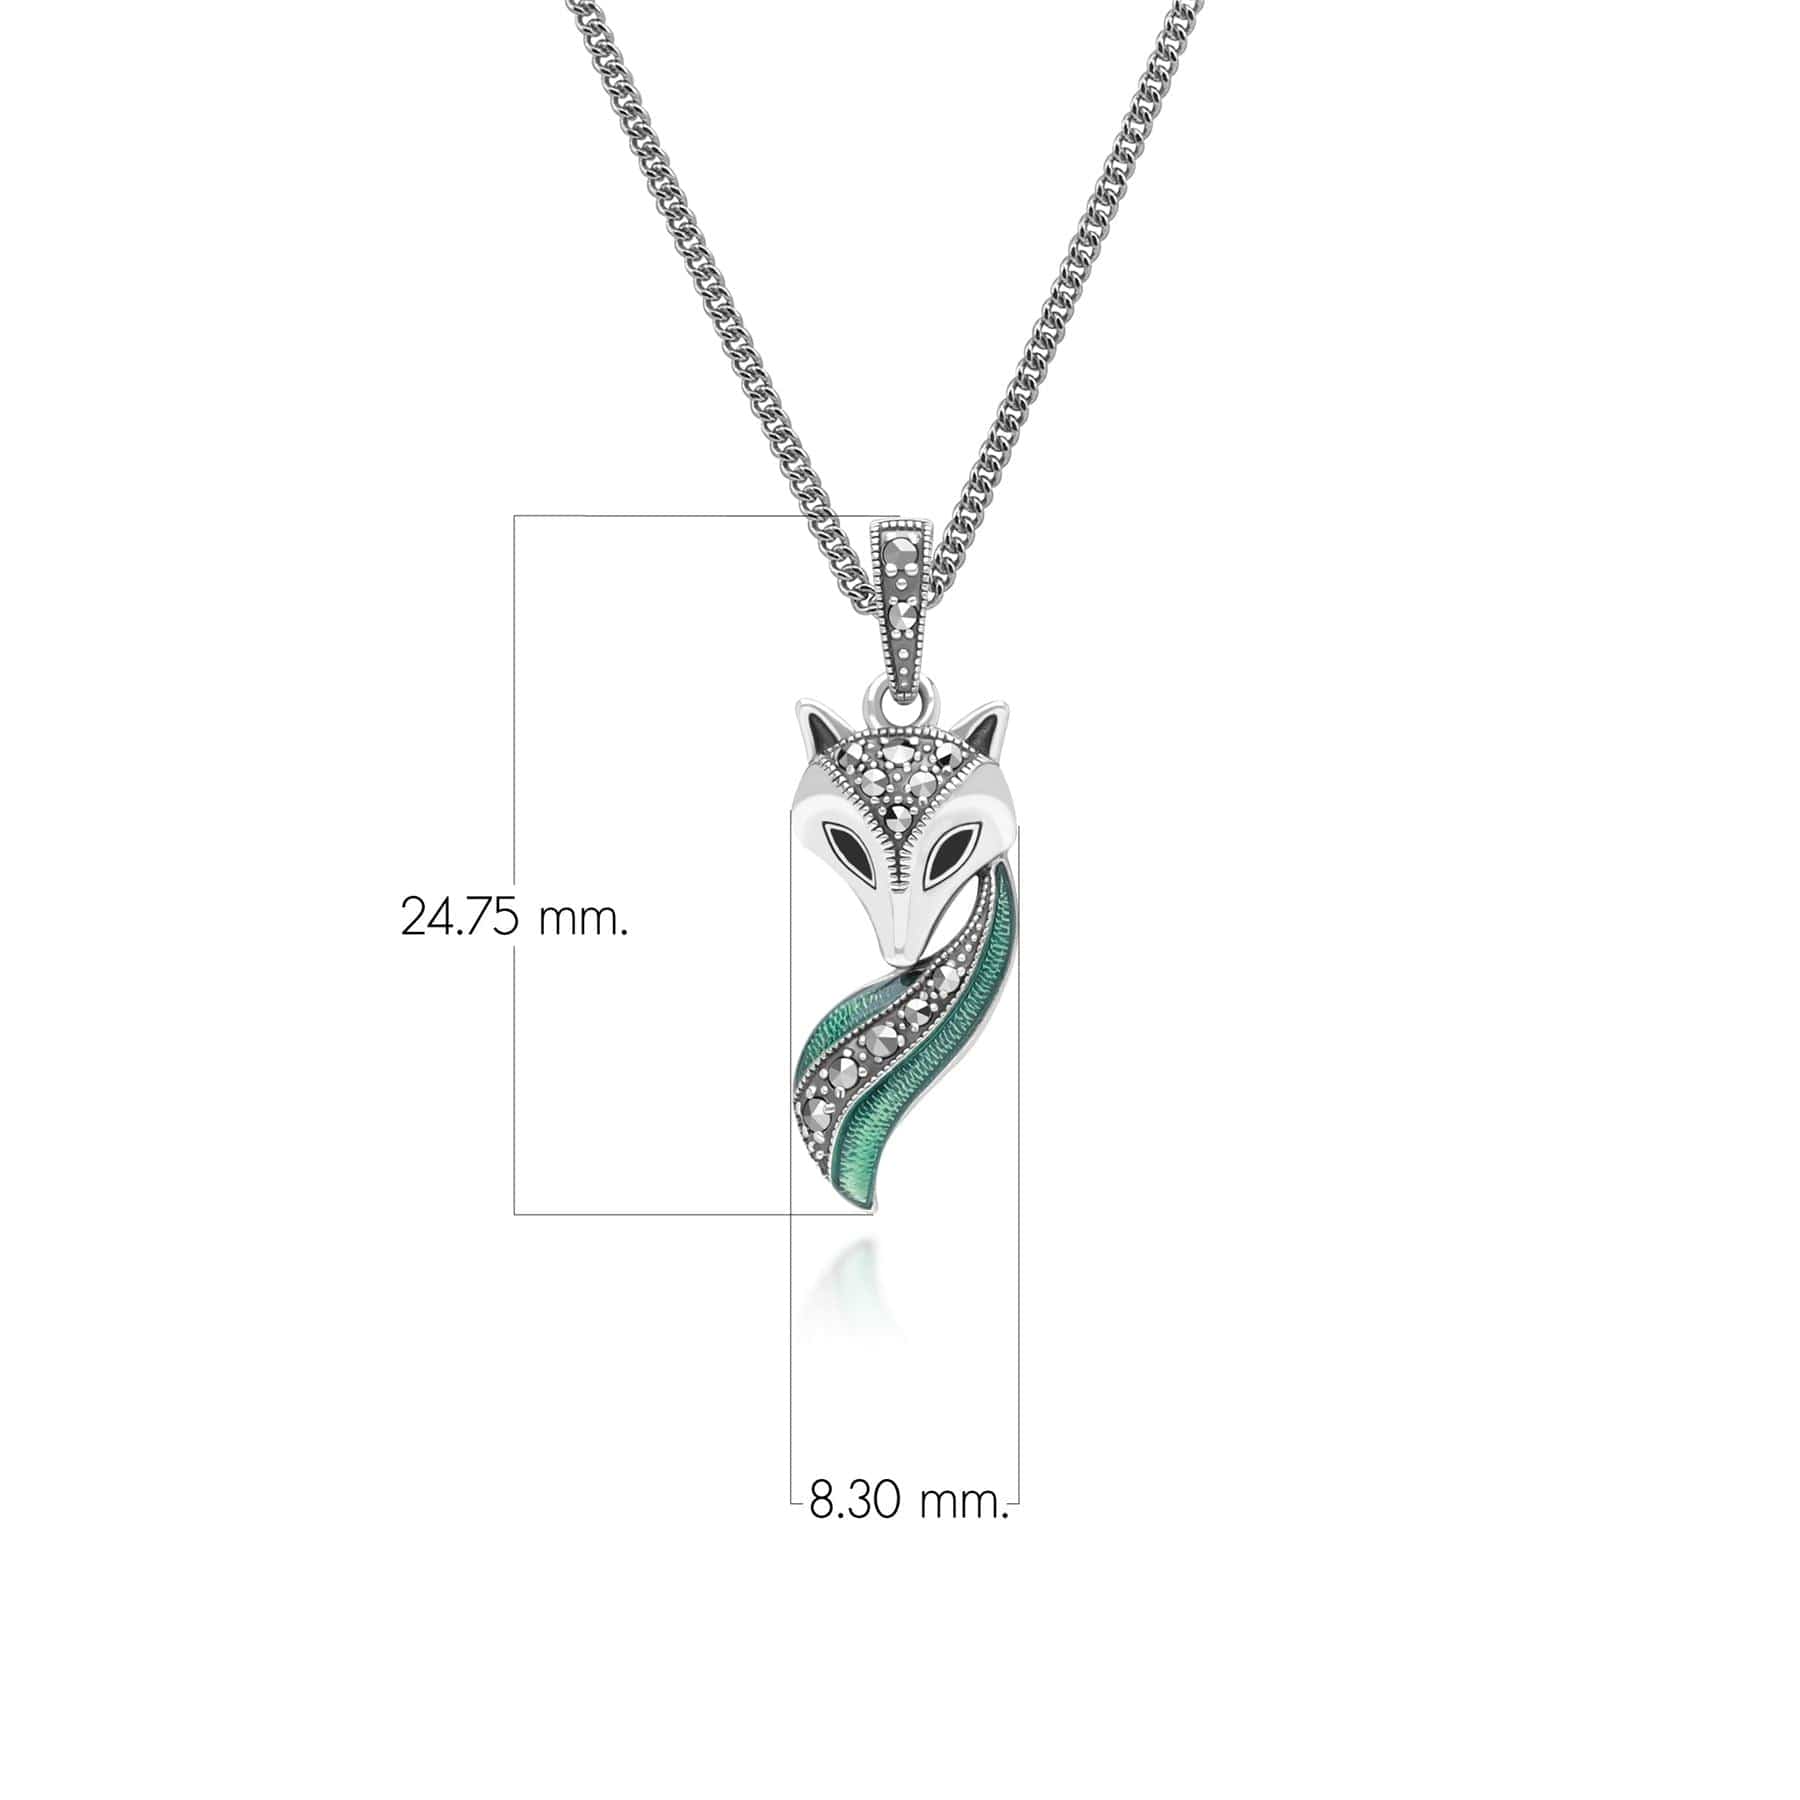 Art Nouveau Style Marcasite, Green and Black Enamel Fox Pendant Necklace in Sterling Silver 214P333801925 Dimensions